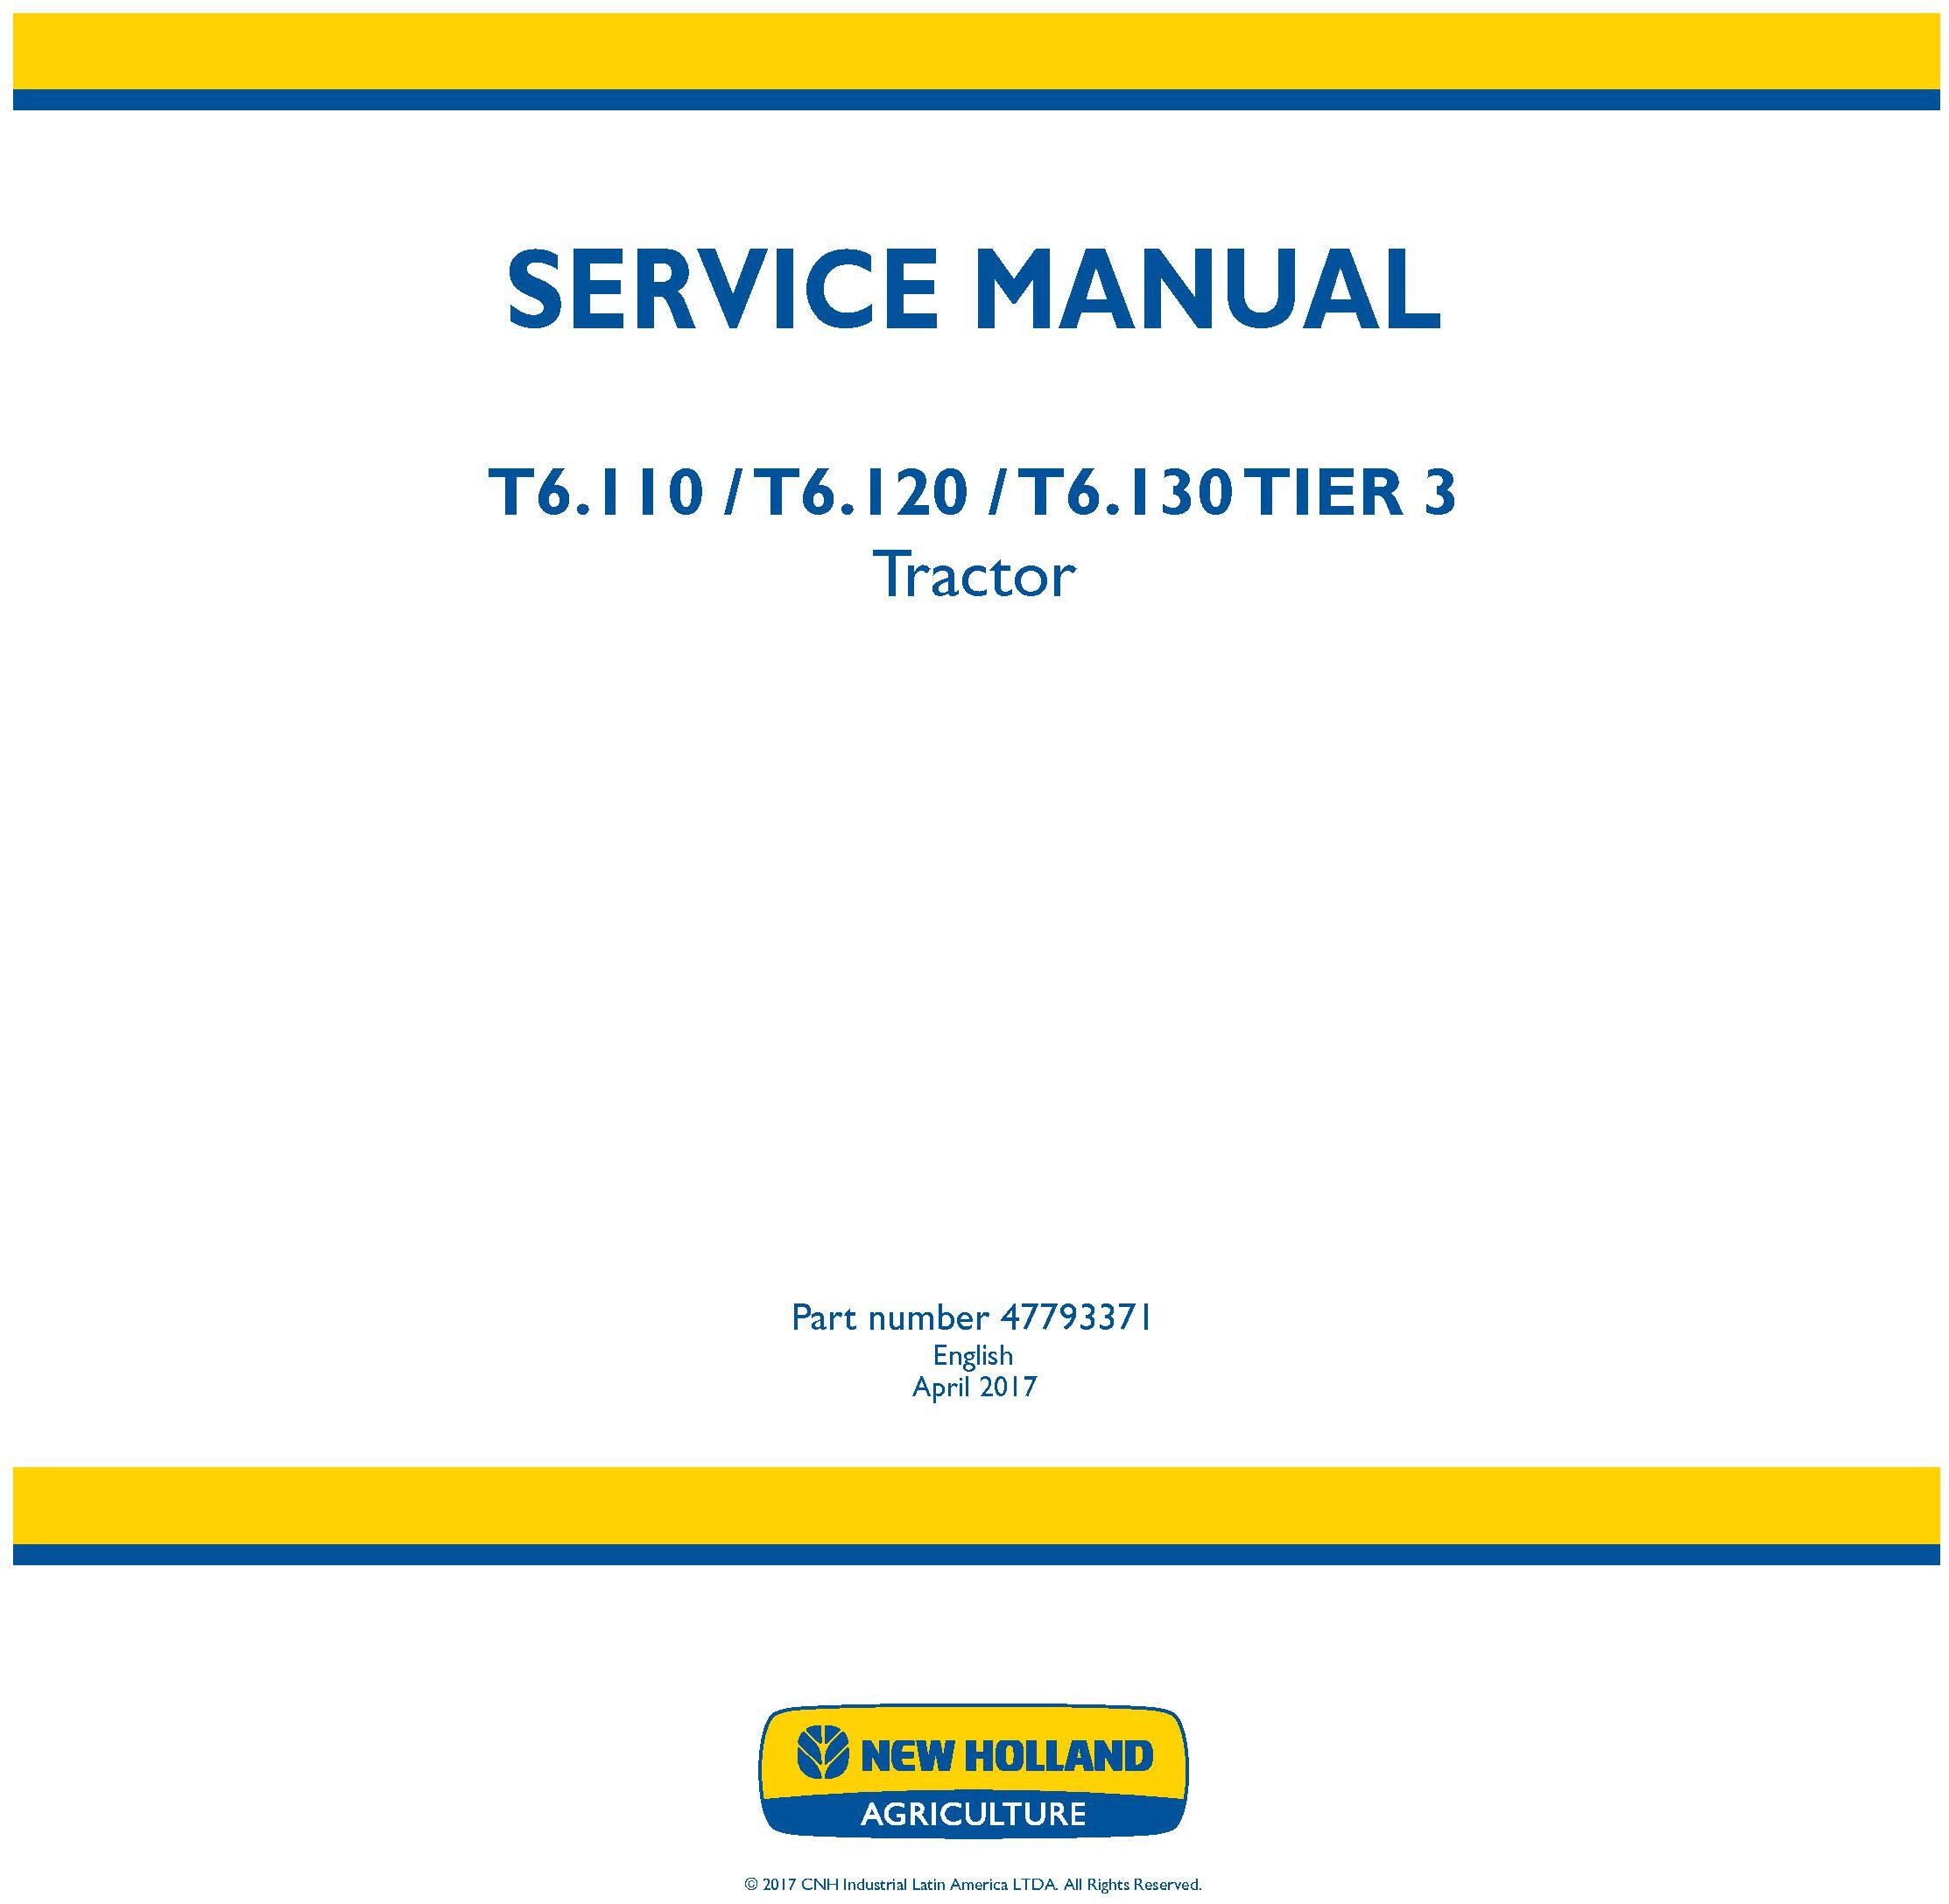 New Holland T6.110, T6.120, T6.130, Tier 3 Tractor Service Manual